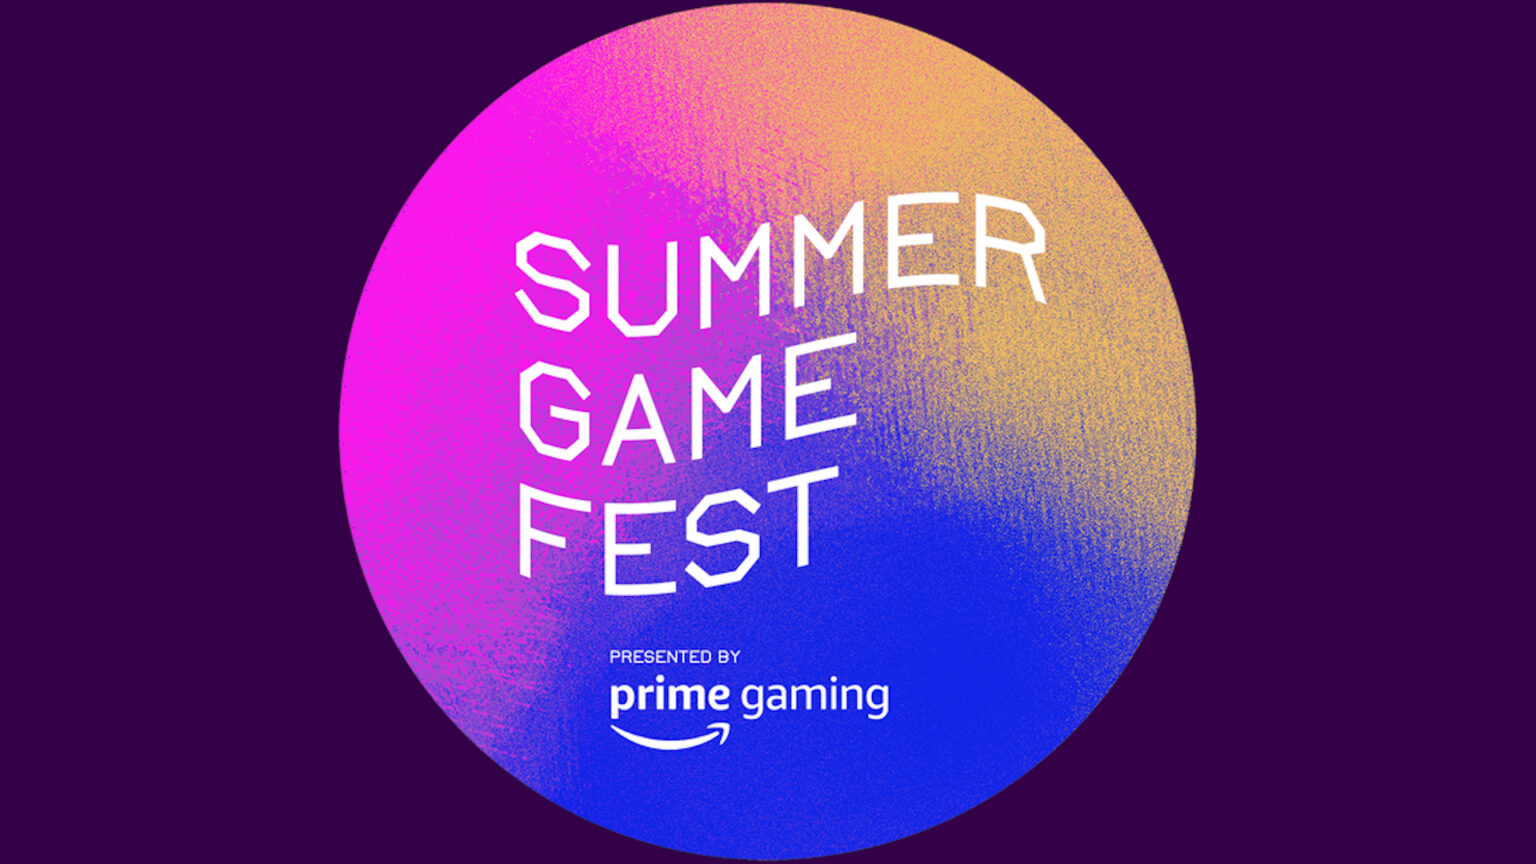 Folks who love games have a place to be every summer: Summer Game Fest. Take a look at the announcements from the event.